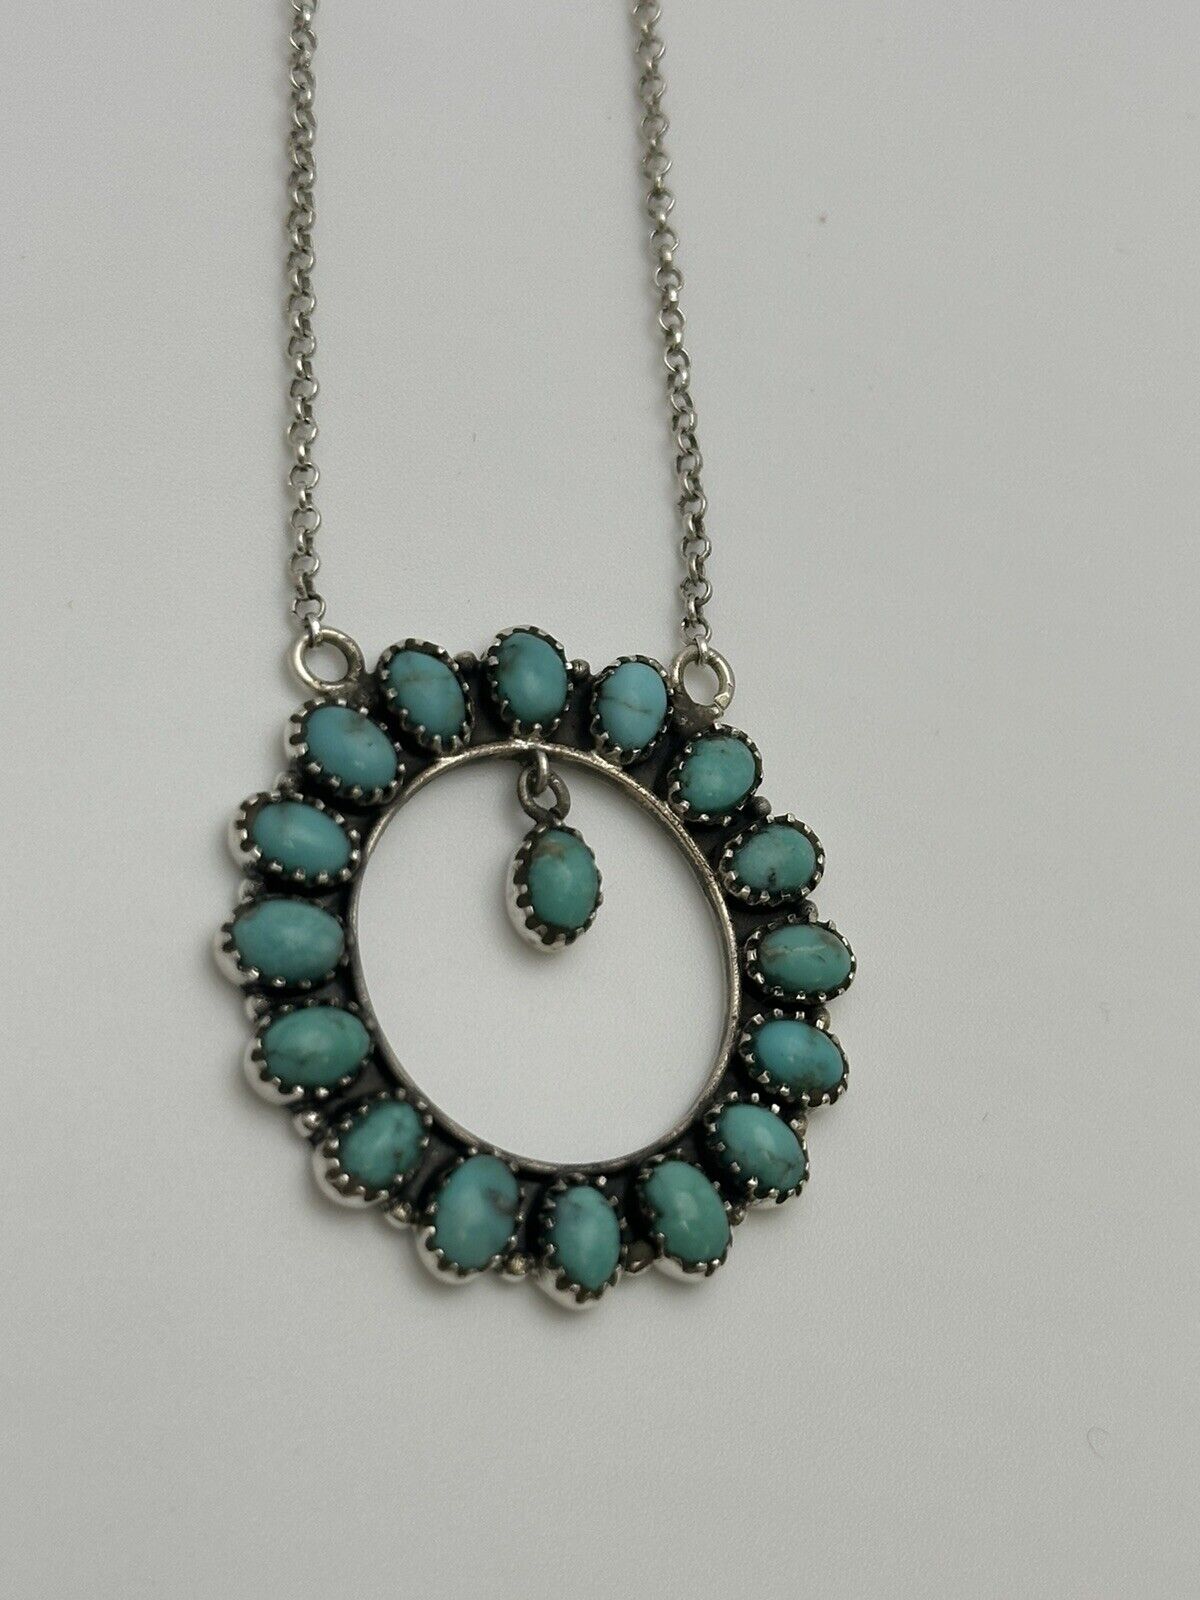 Turquoise Open Circle Necklace 925 Sterling Silver 15-17”